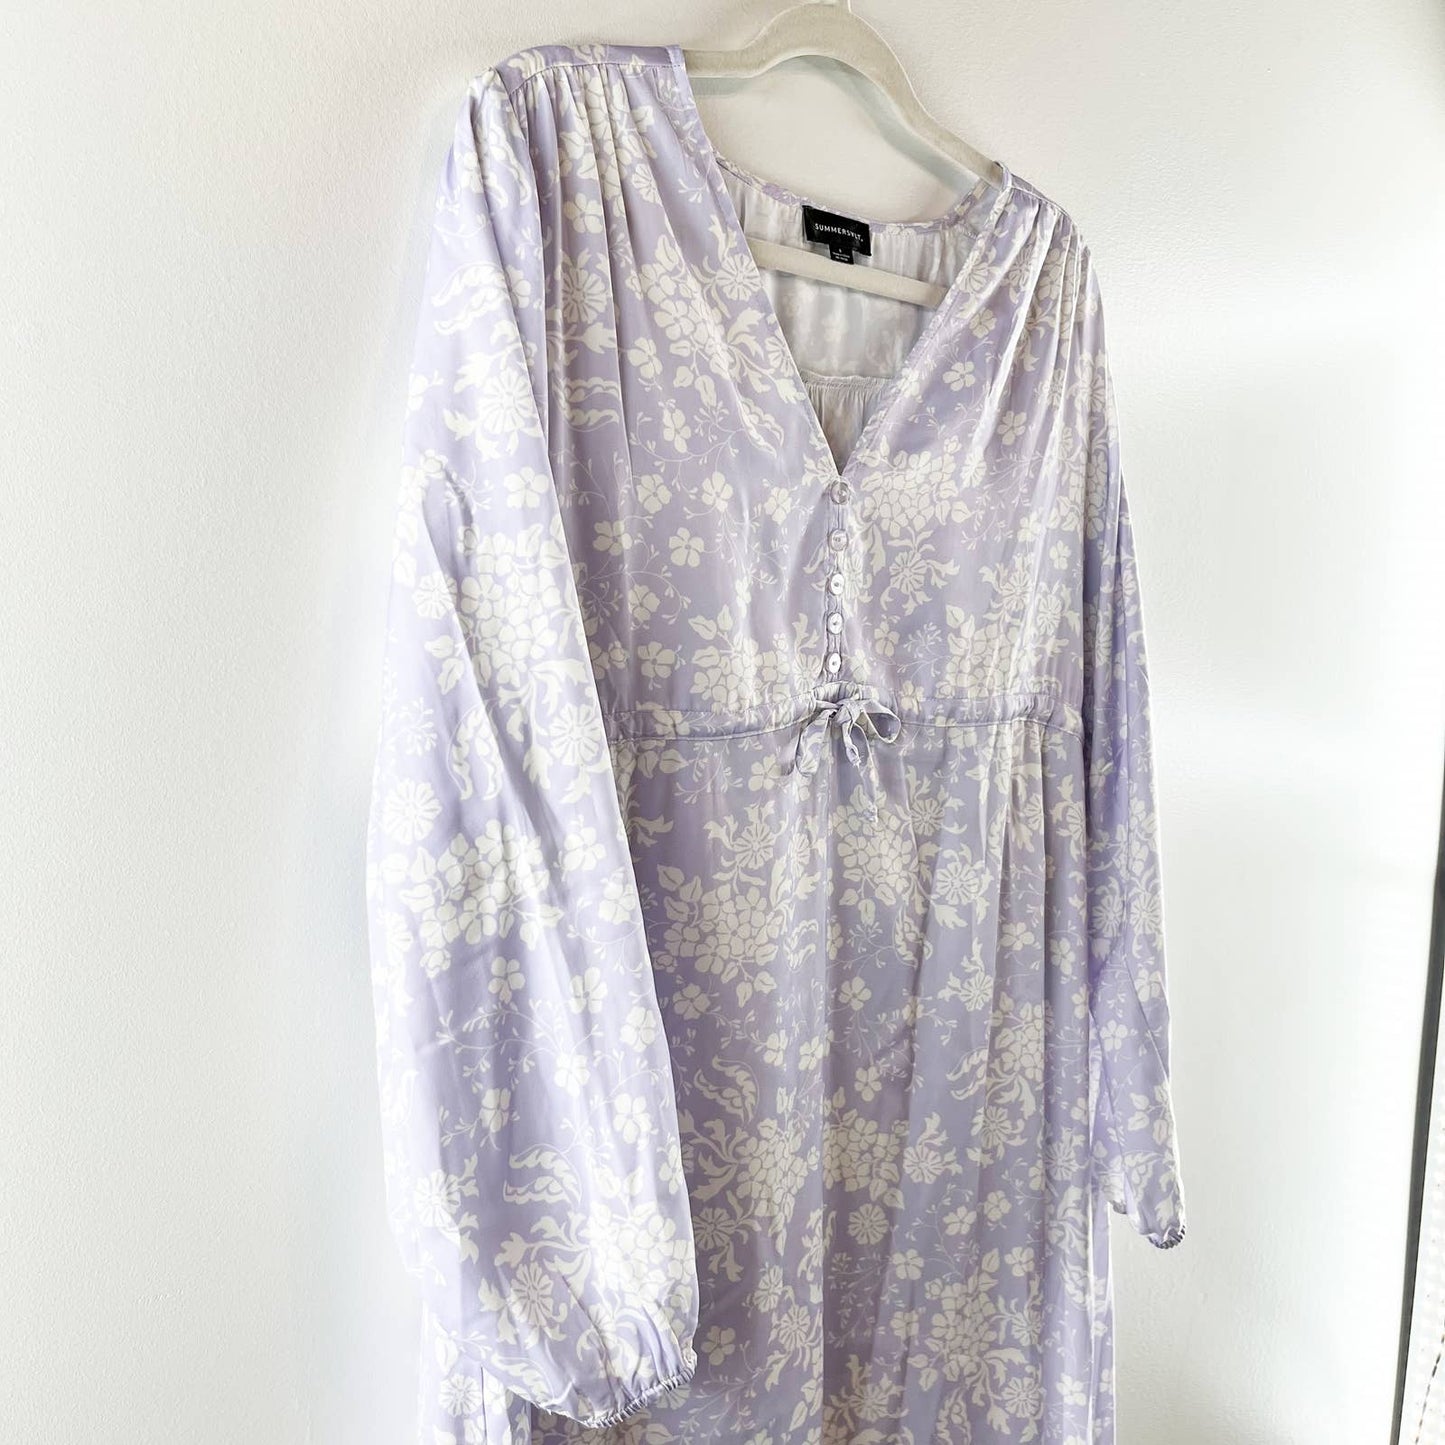 Summersalt The Cinched Waist Caftan Dress in Vintage Floral Lavender Small NWT